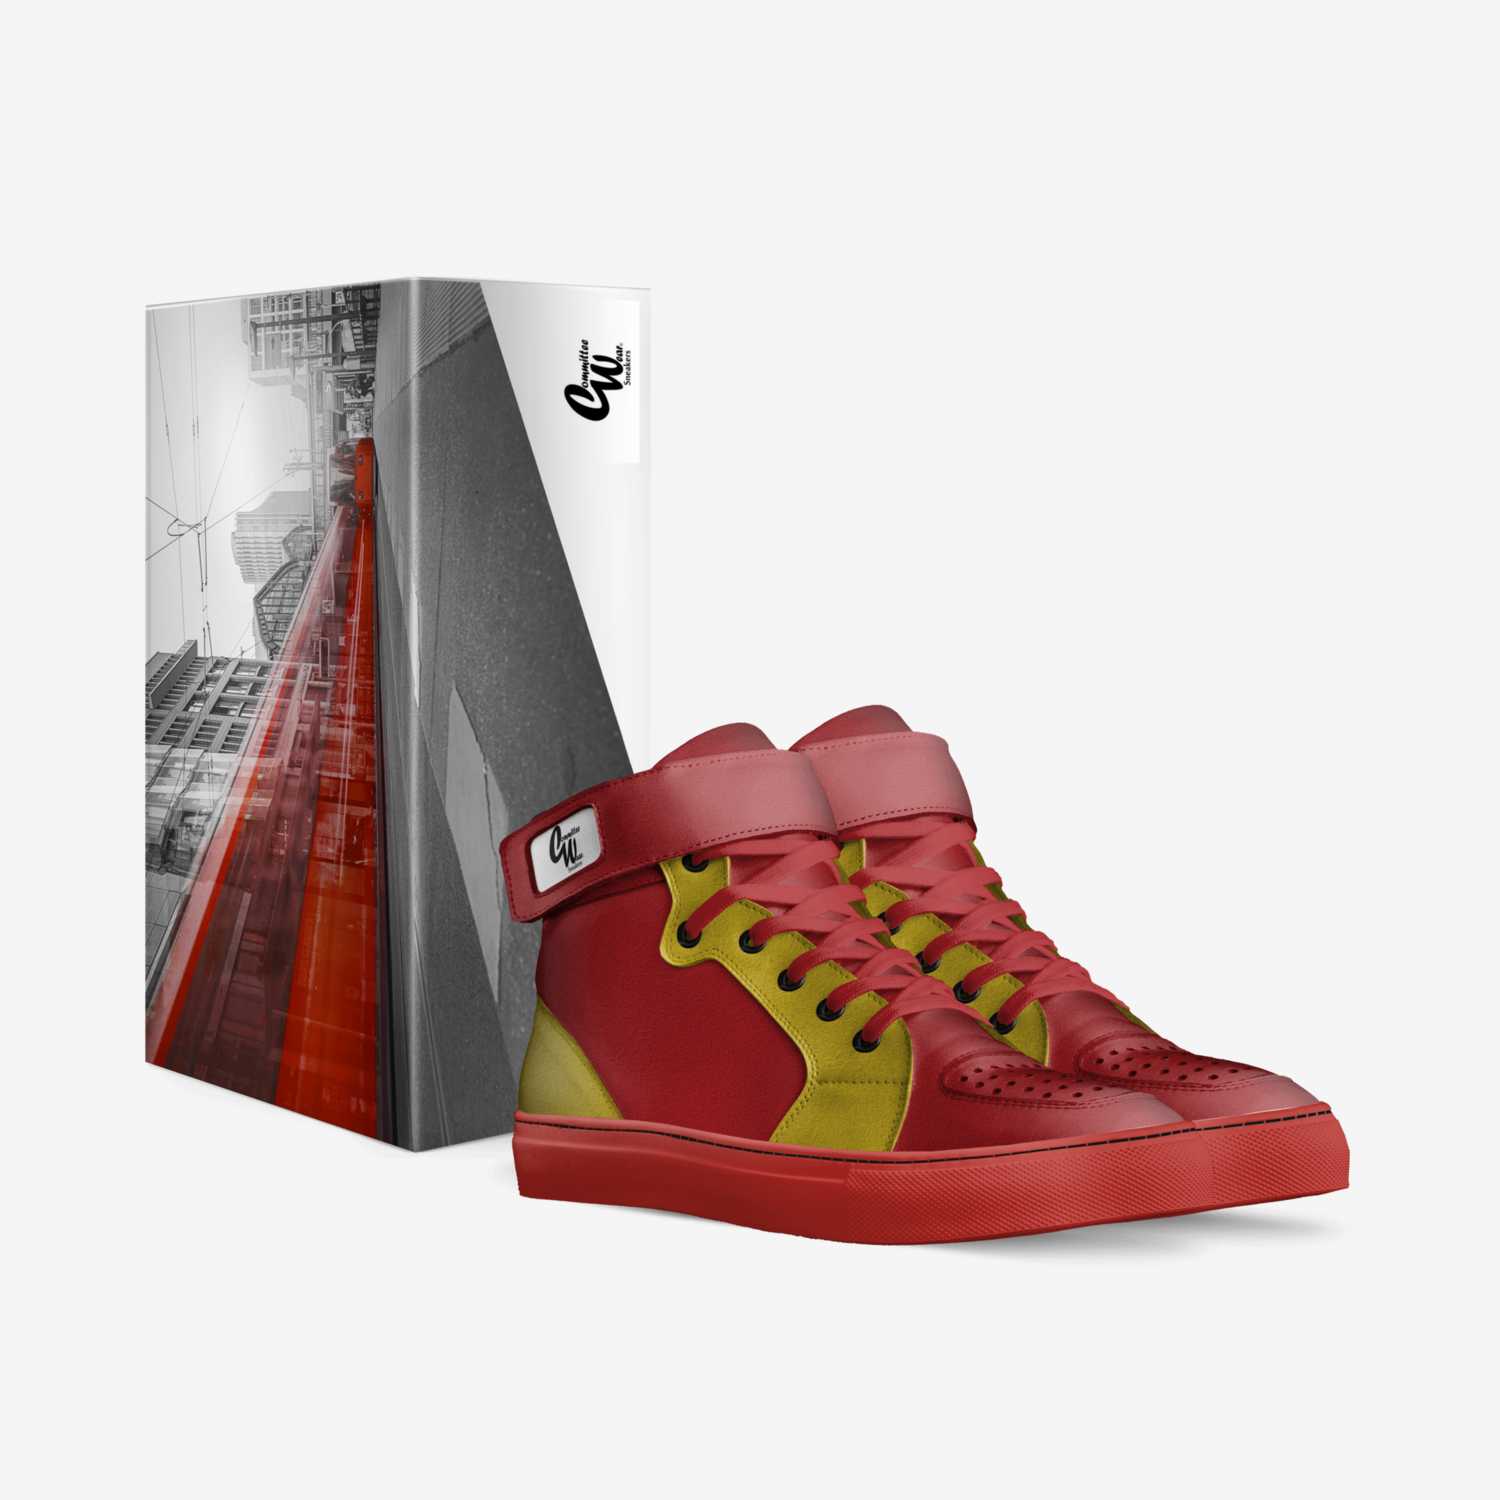 CW RED   custom made in Italy shoes by Terrence Ford | Box view